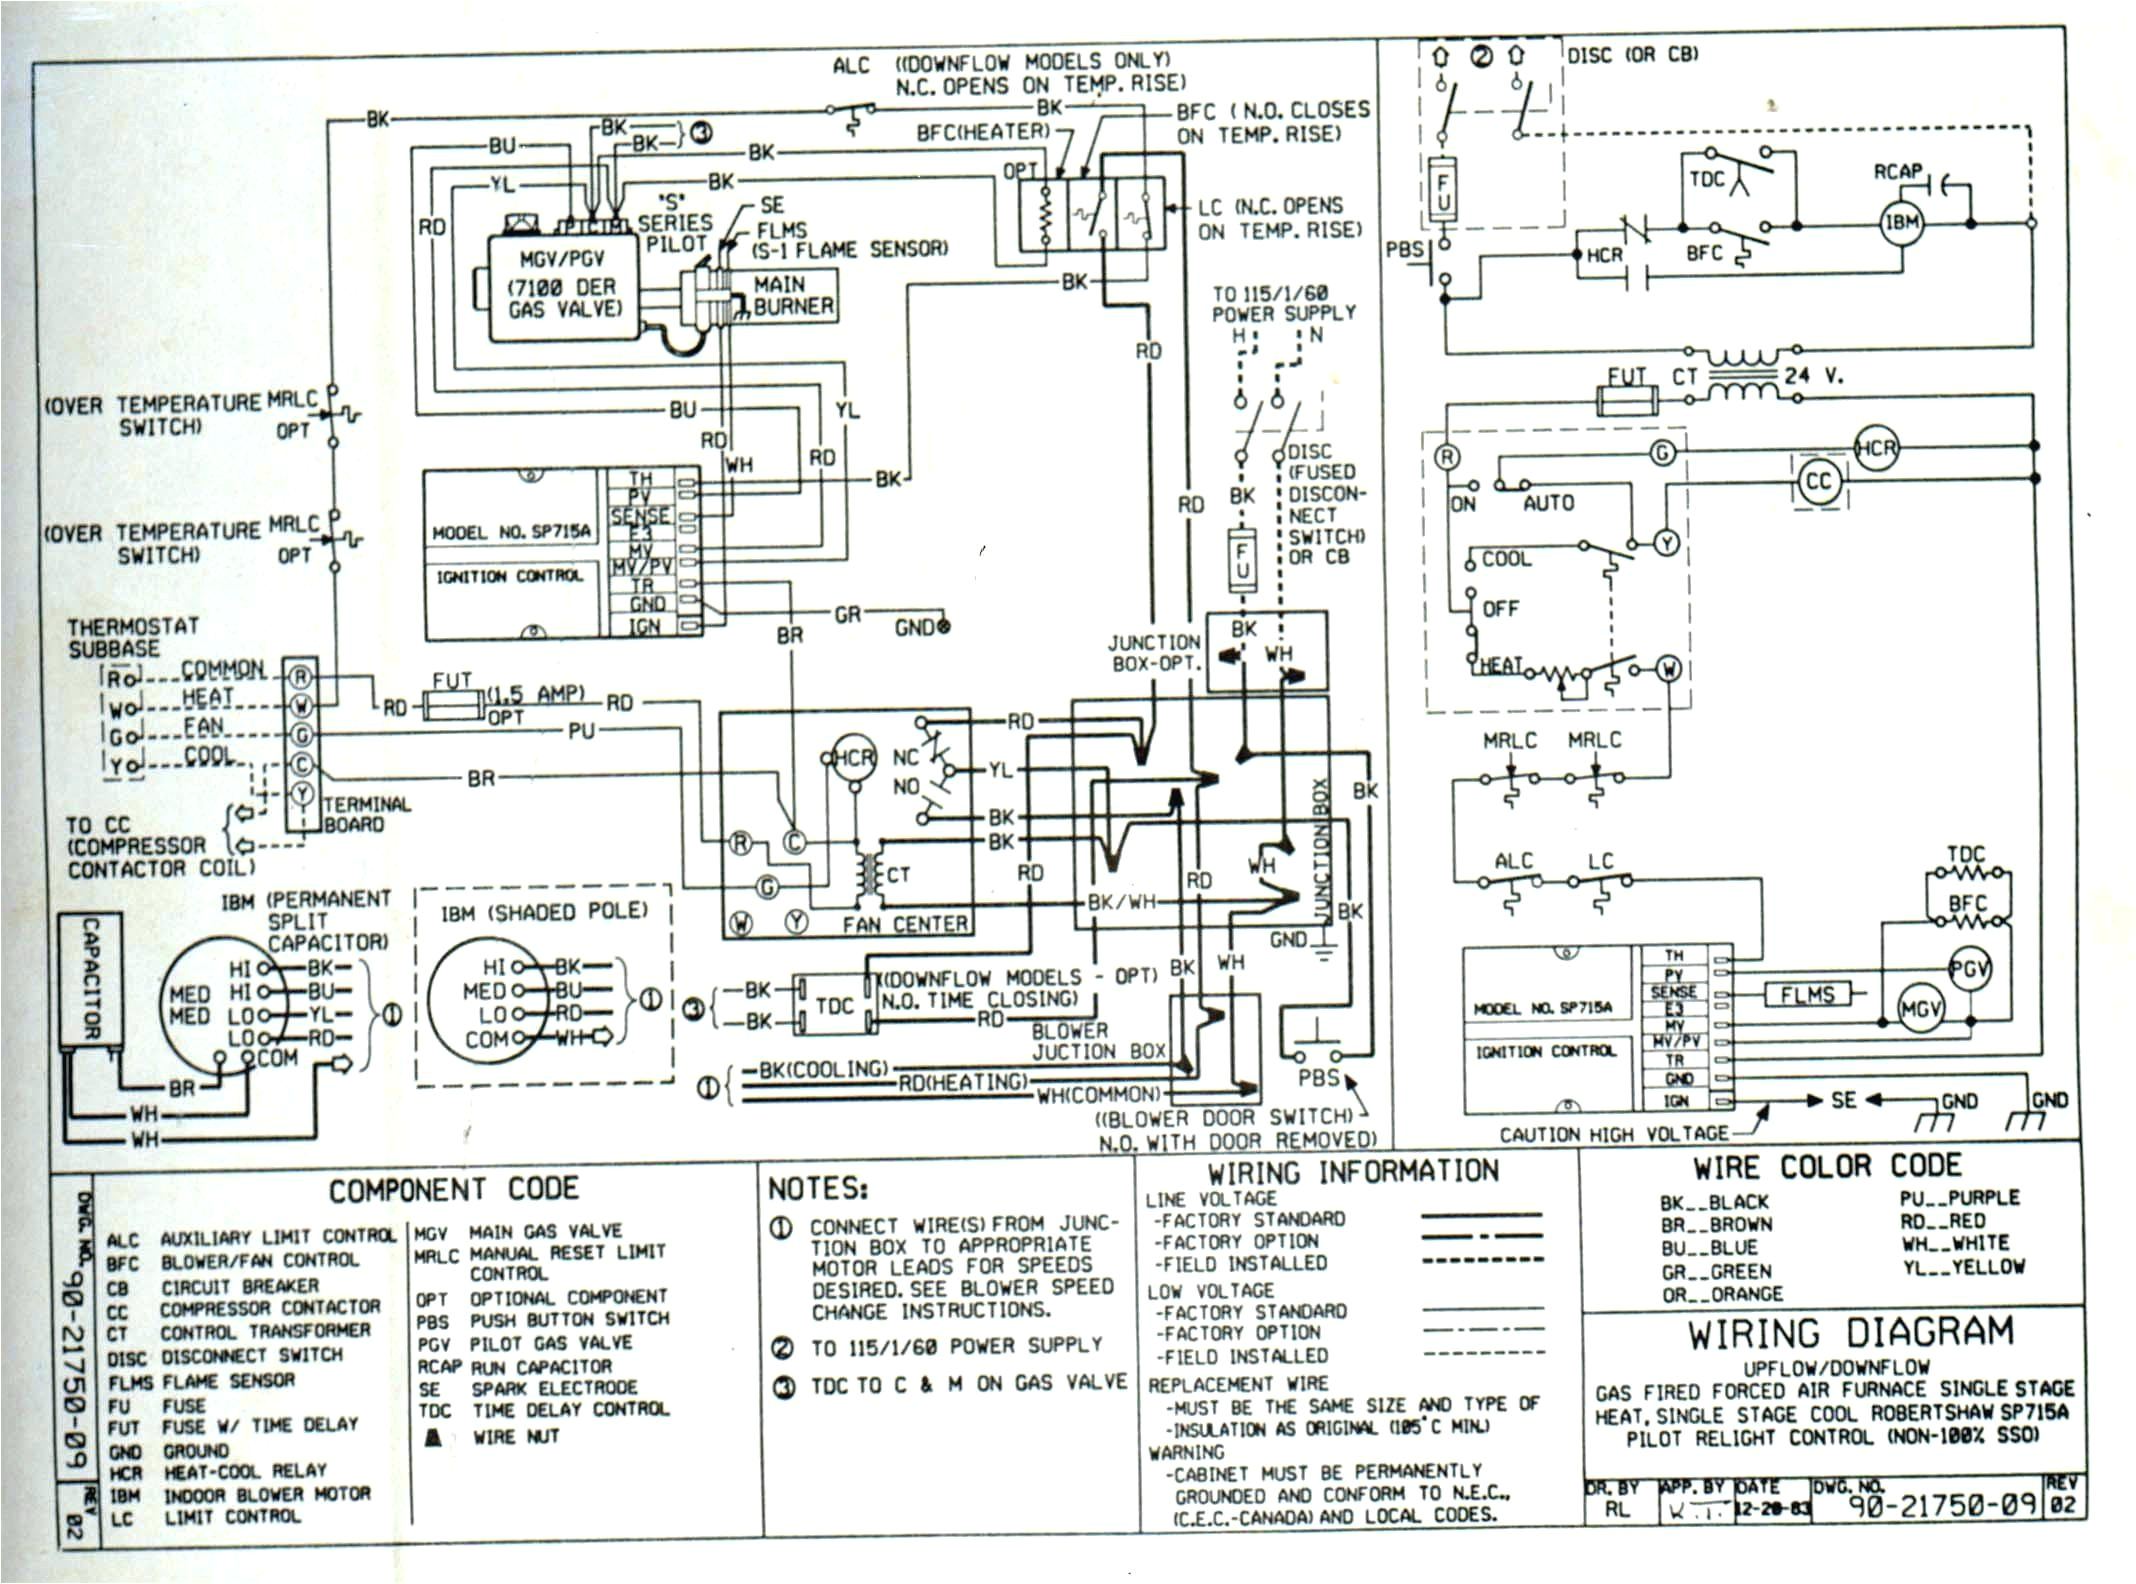 payne package unit wiring diagram collection